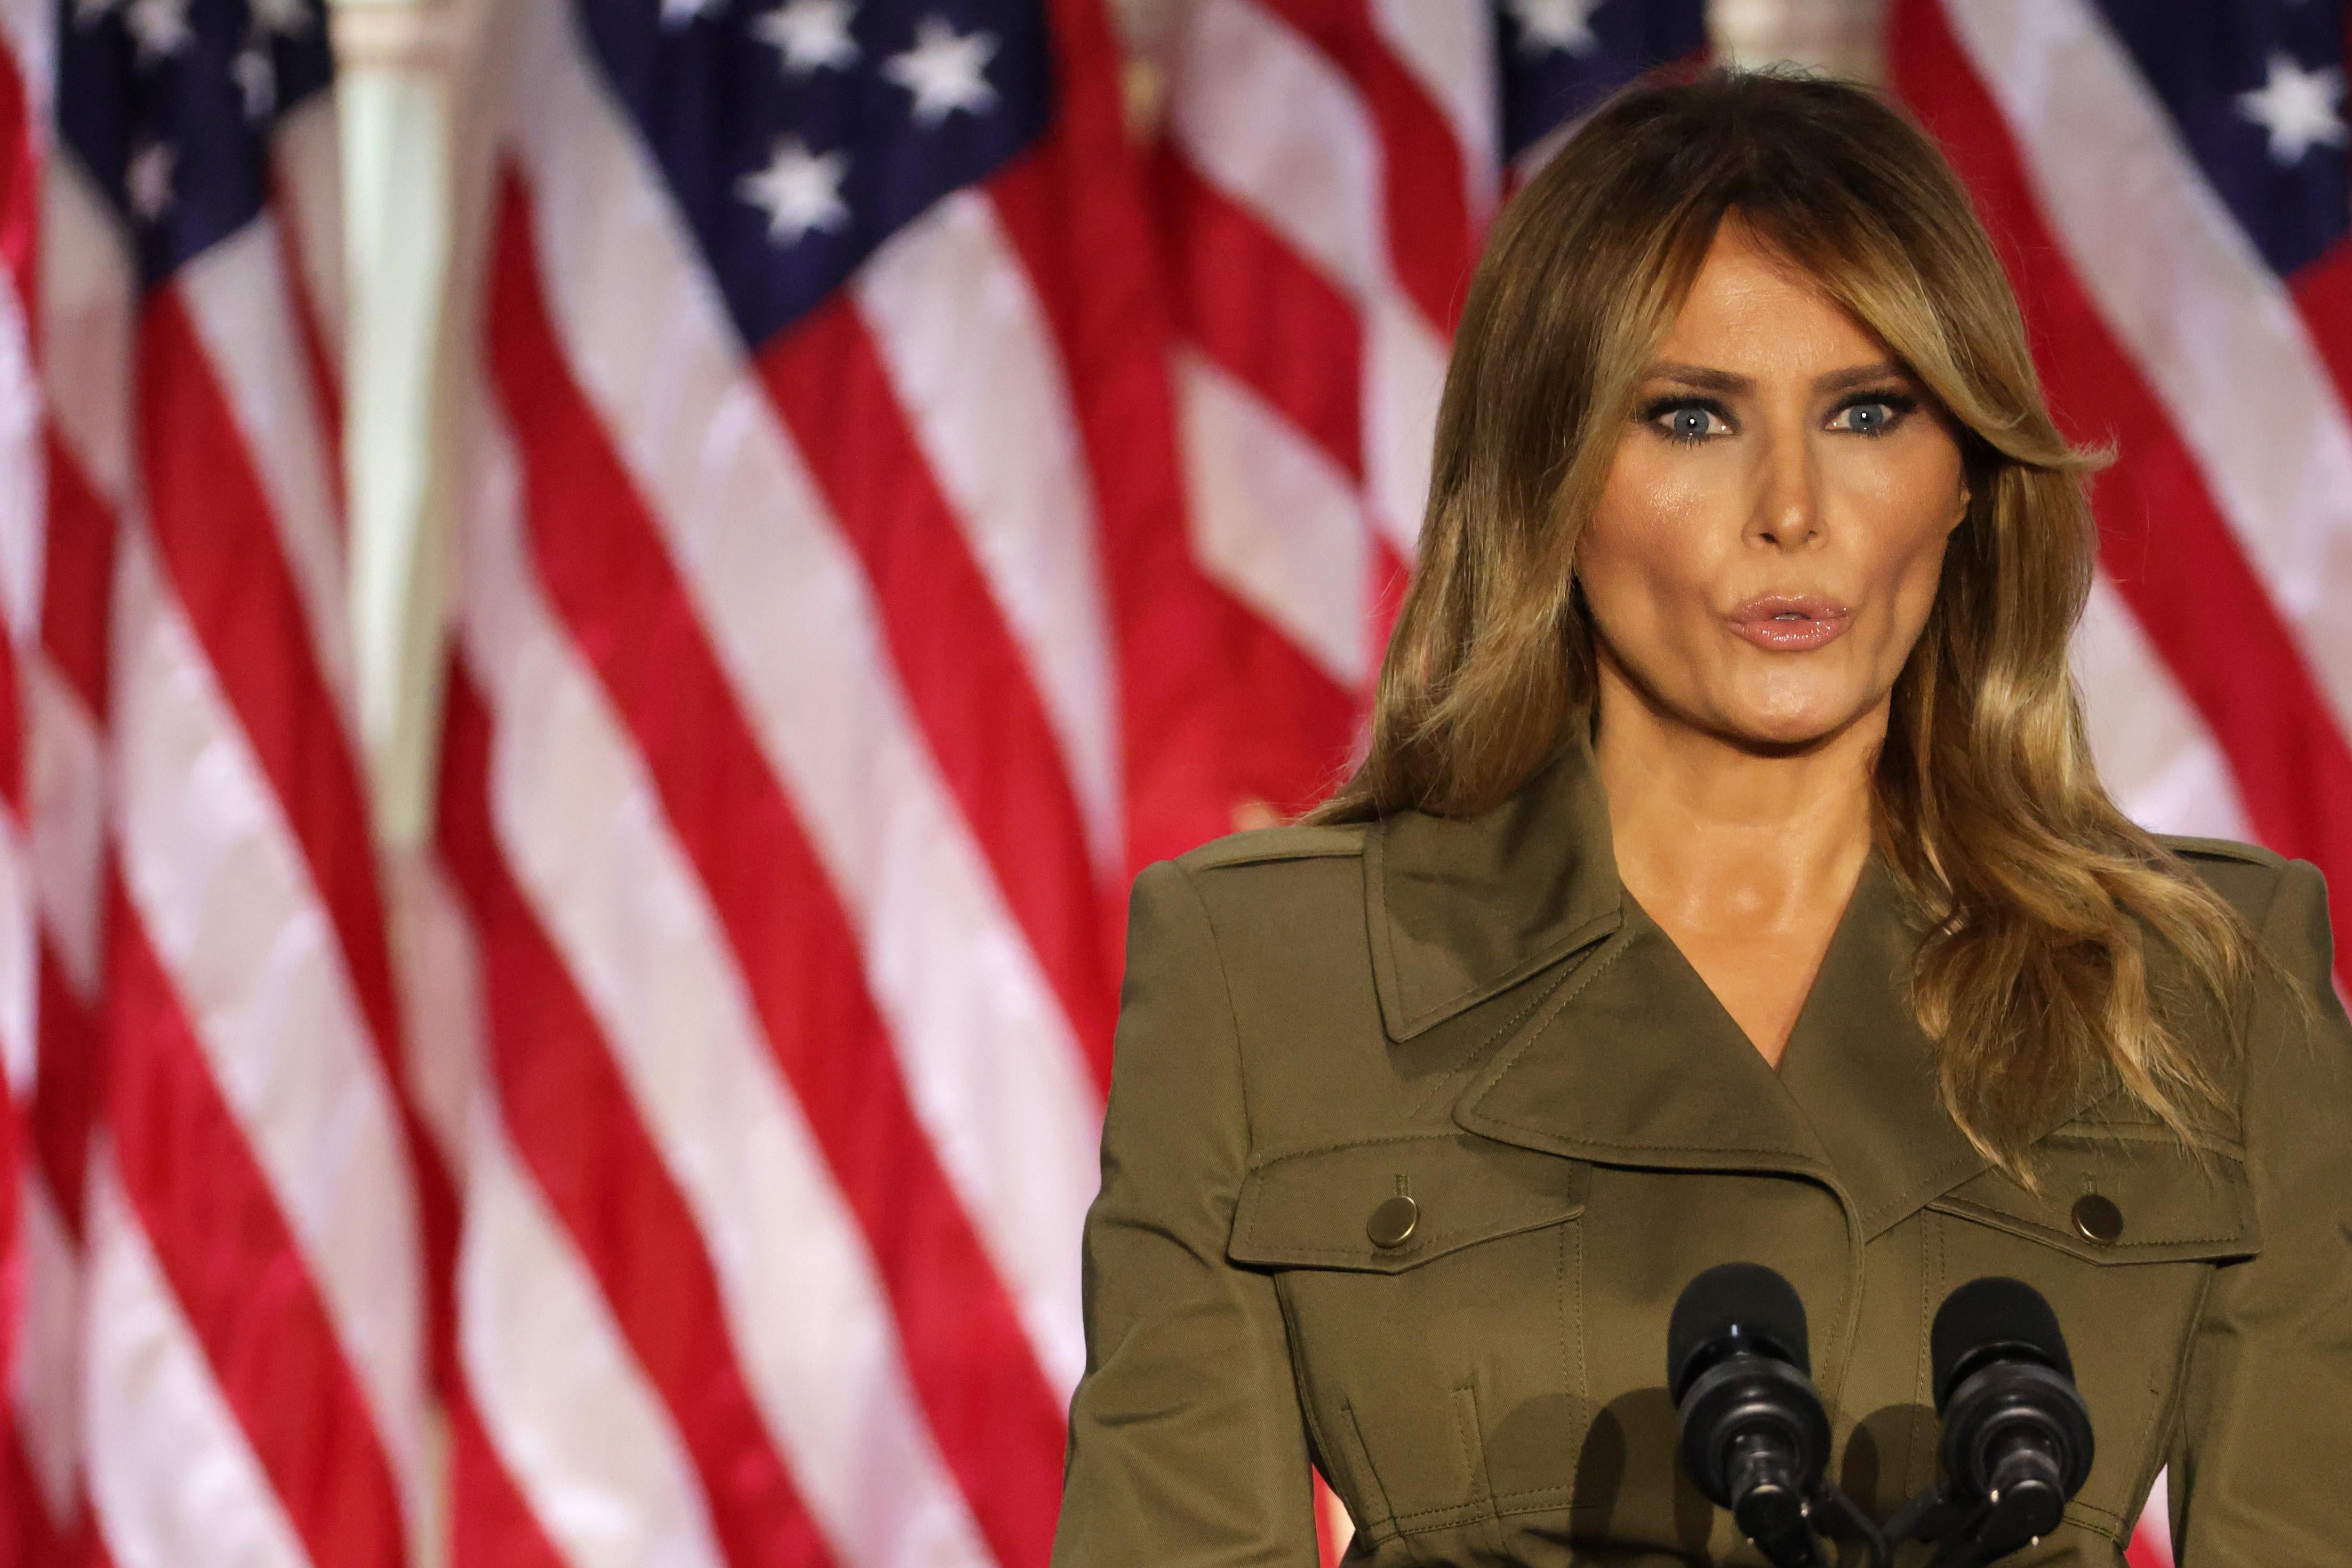 Melania Trump, in an olive-green military-looking jacket, speaks into a cluster of microphones, backed by several U.S. flags.